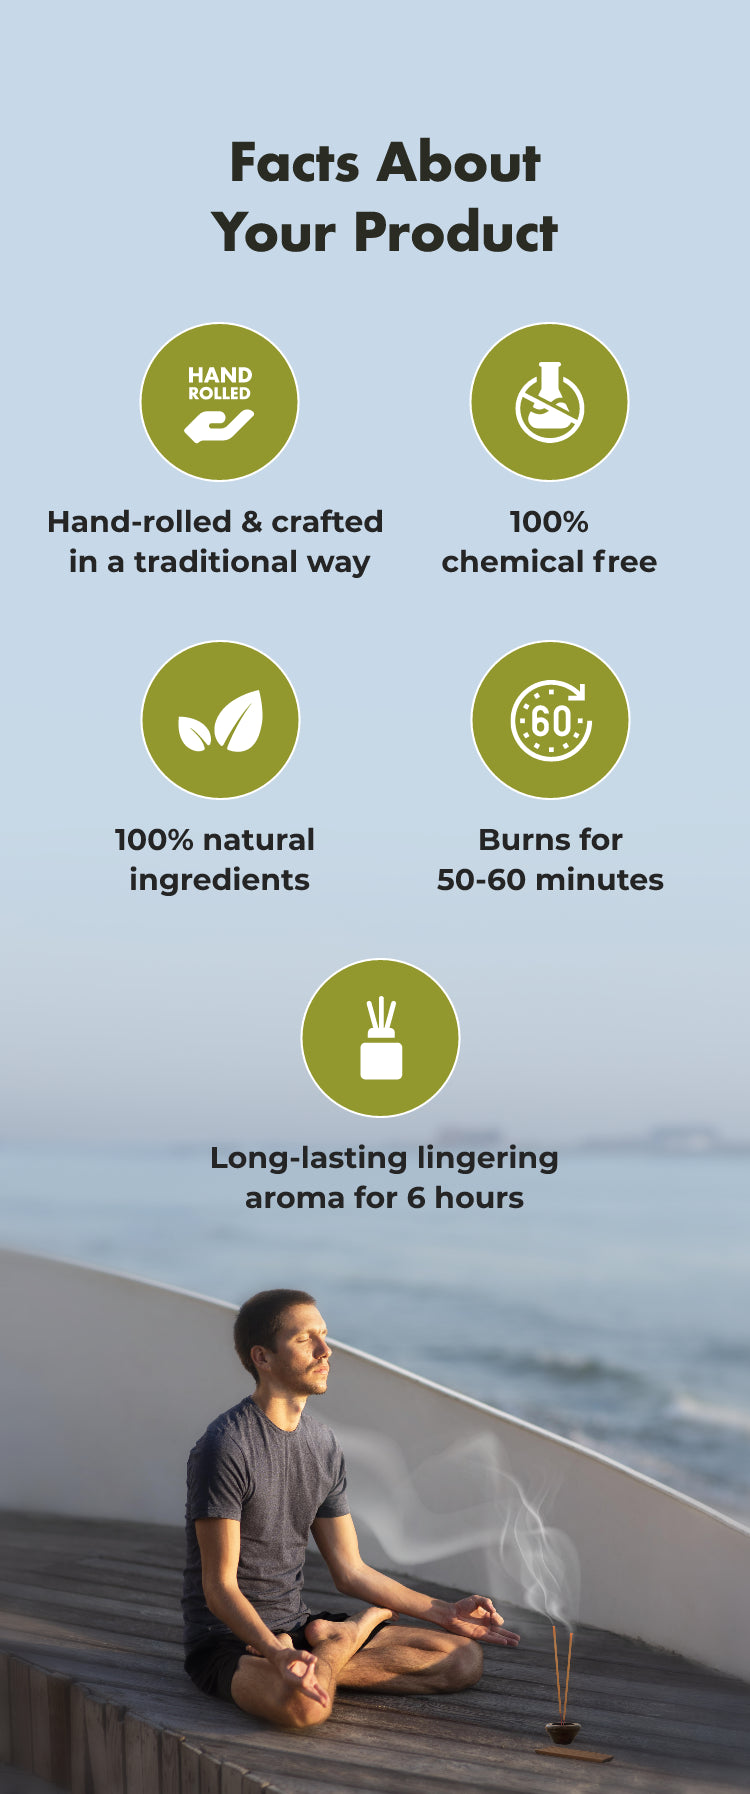 Facts About Your Product
HAND
Hand-rolled & crafted in a traditional way
100%
chemical free
100% natural ingredients
€60
Burns for 50-60 minutes
Long-lasting lingering aroma for 6 hours